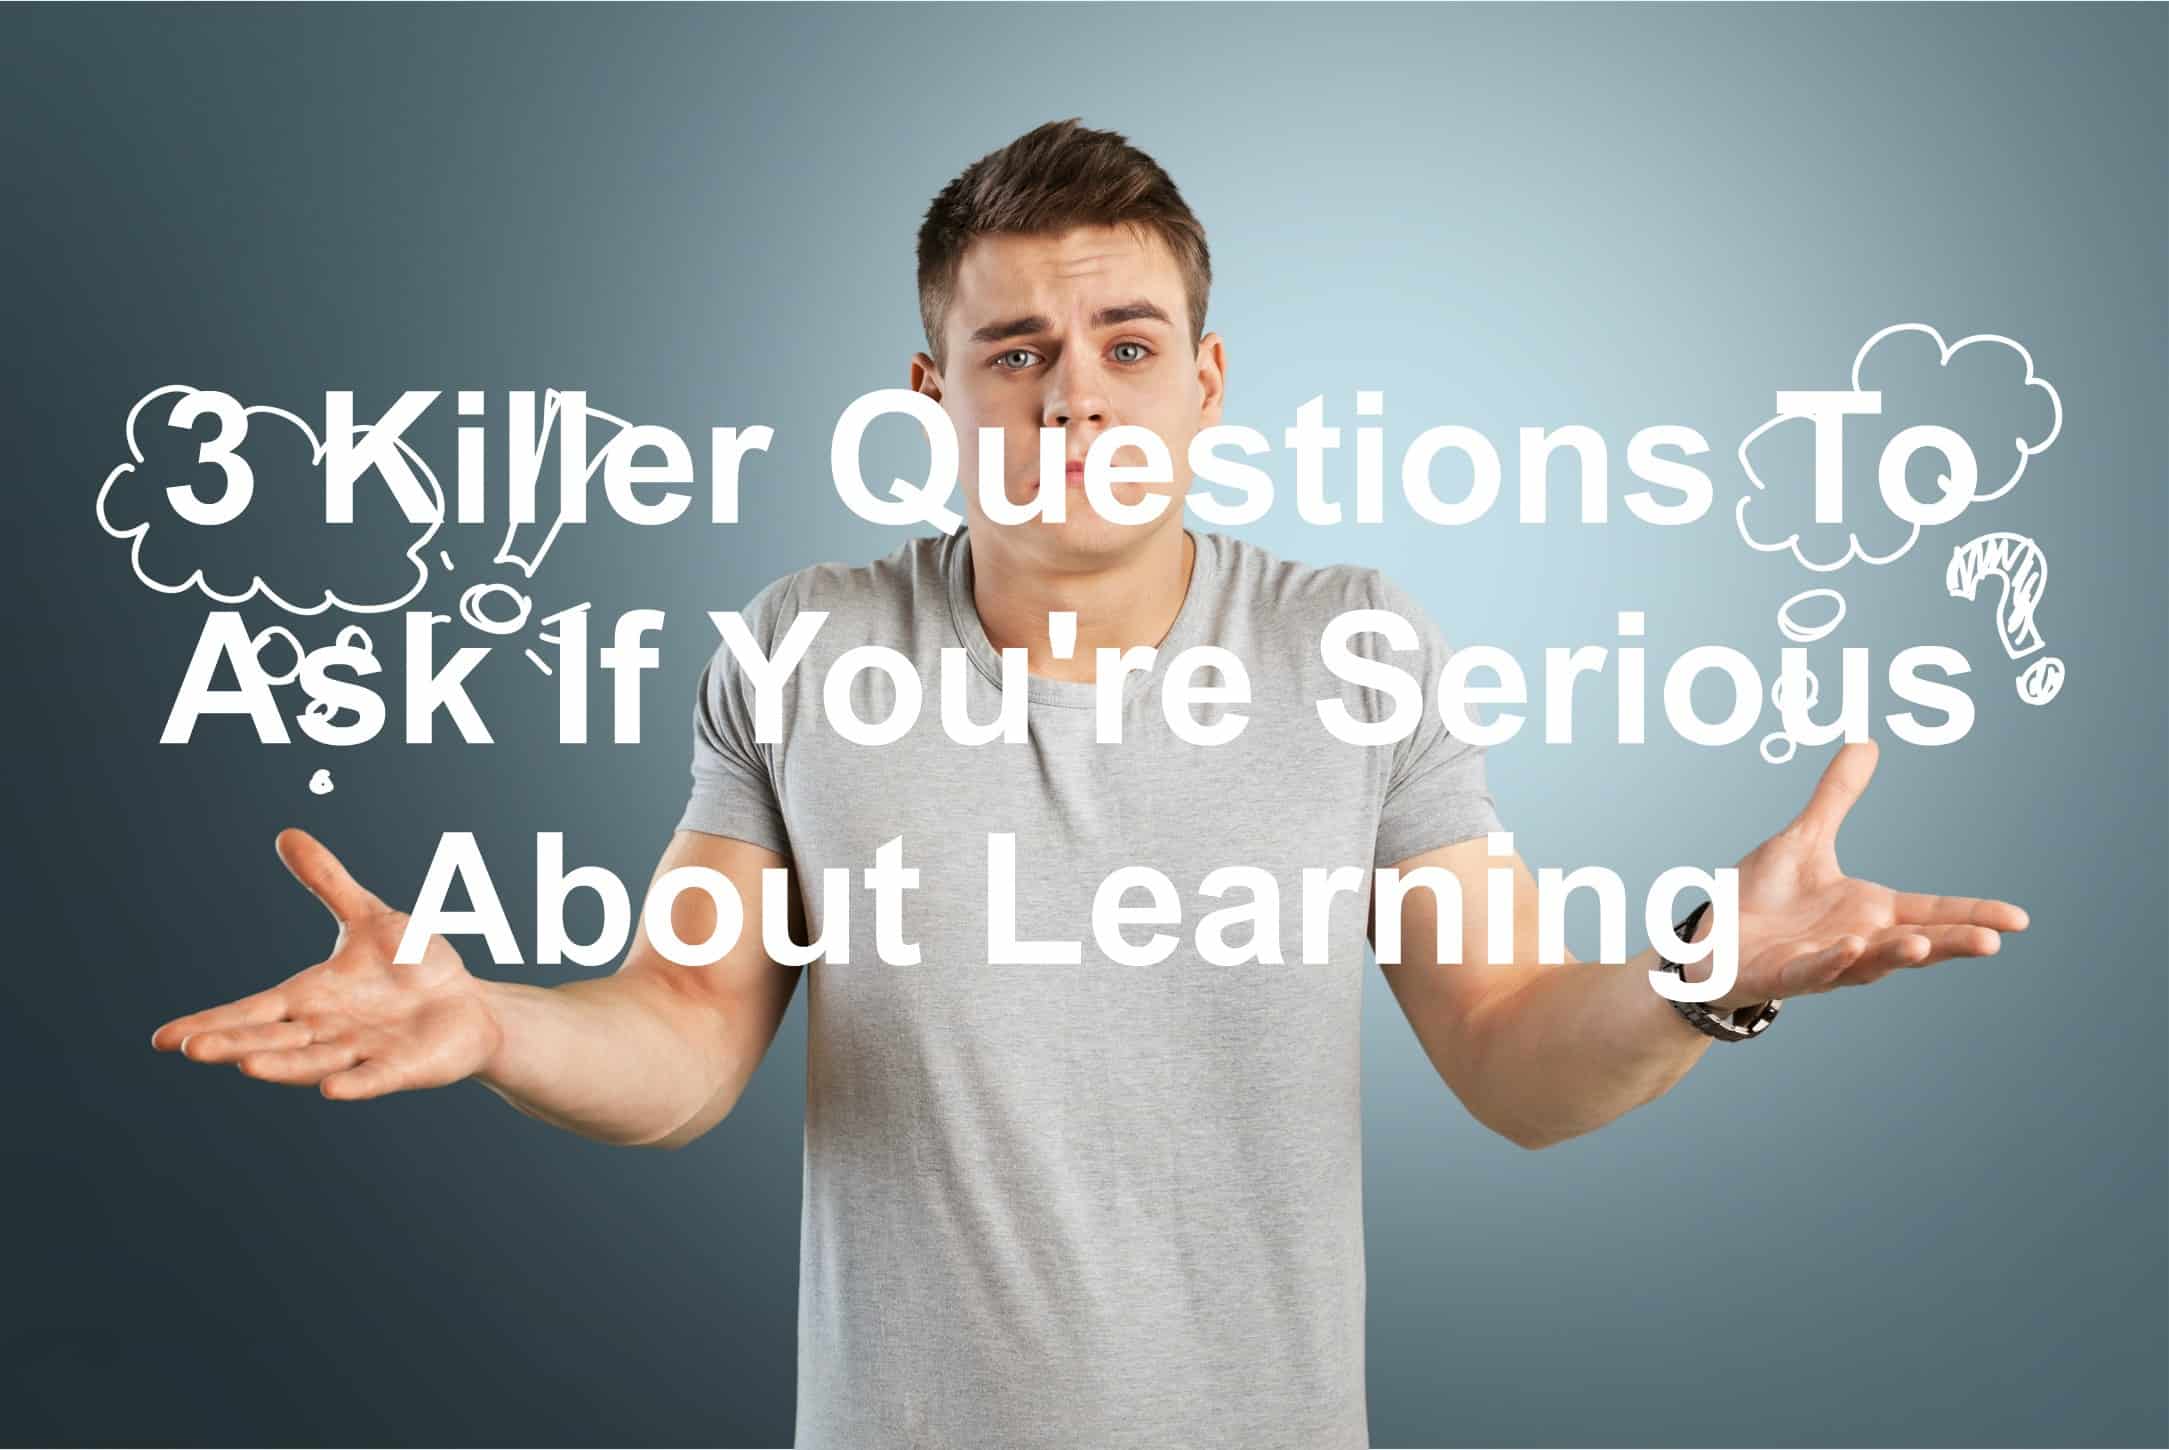 Questions to learn